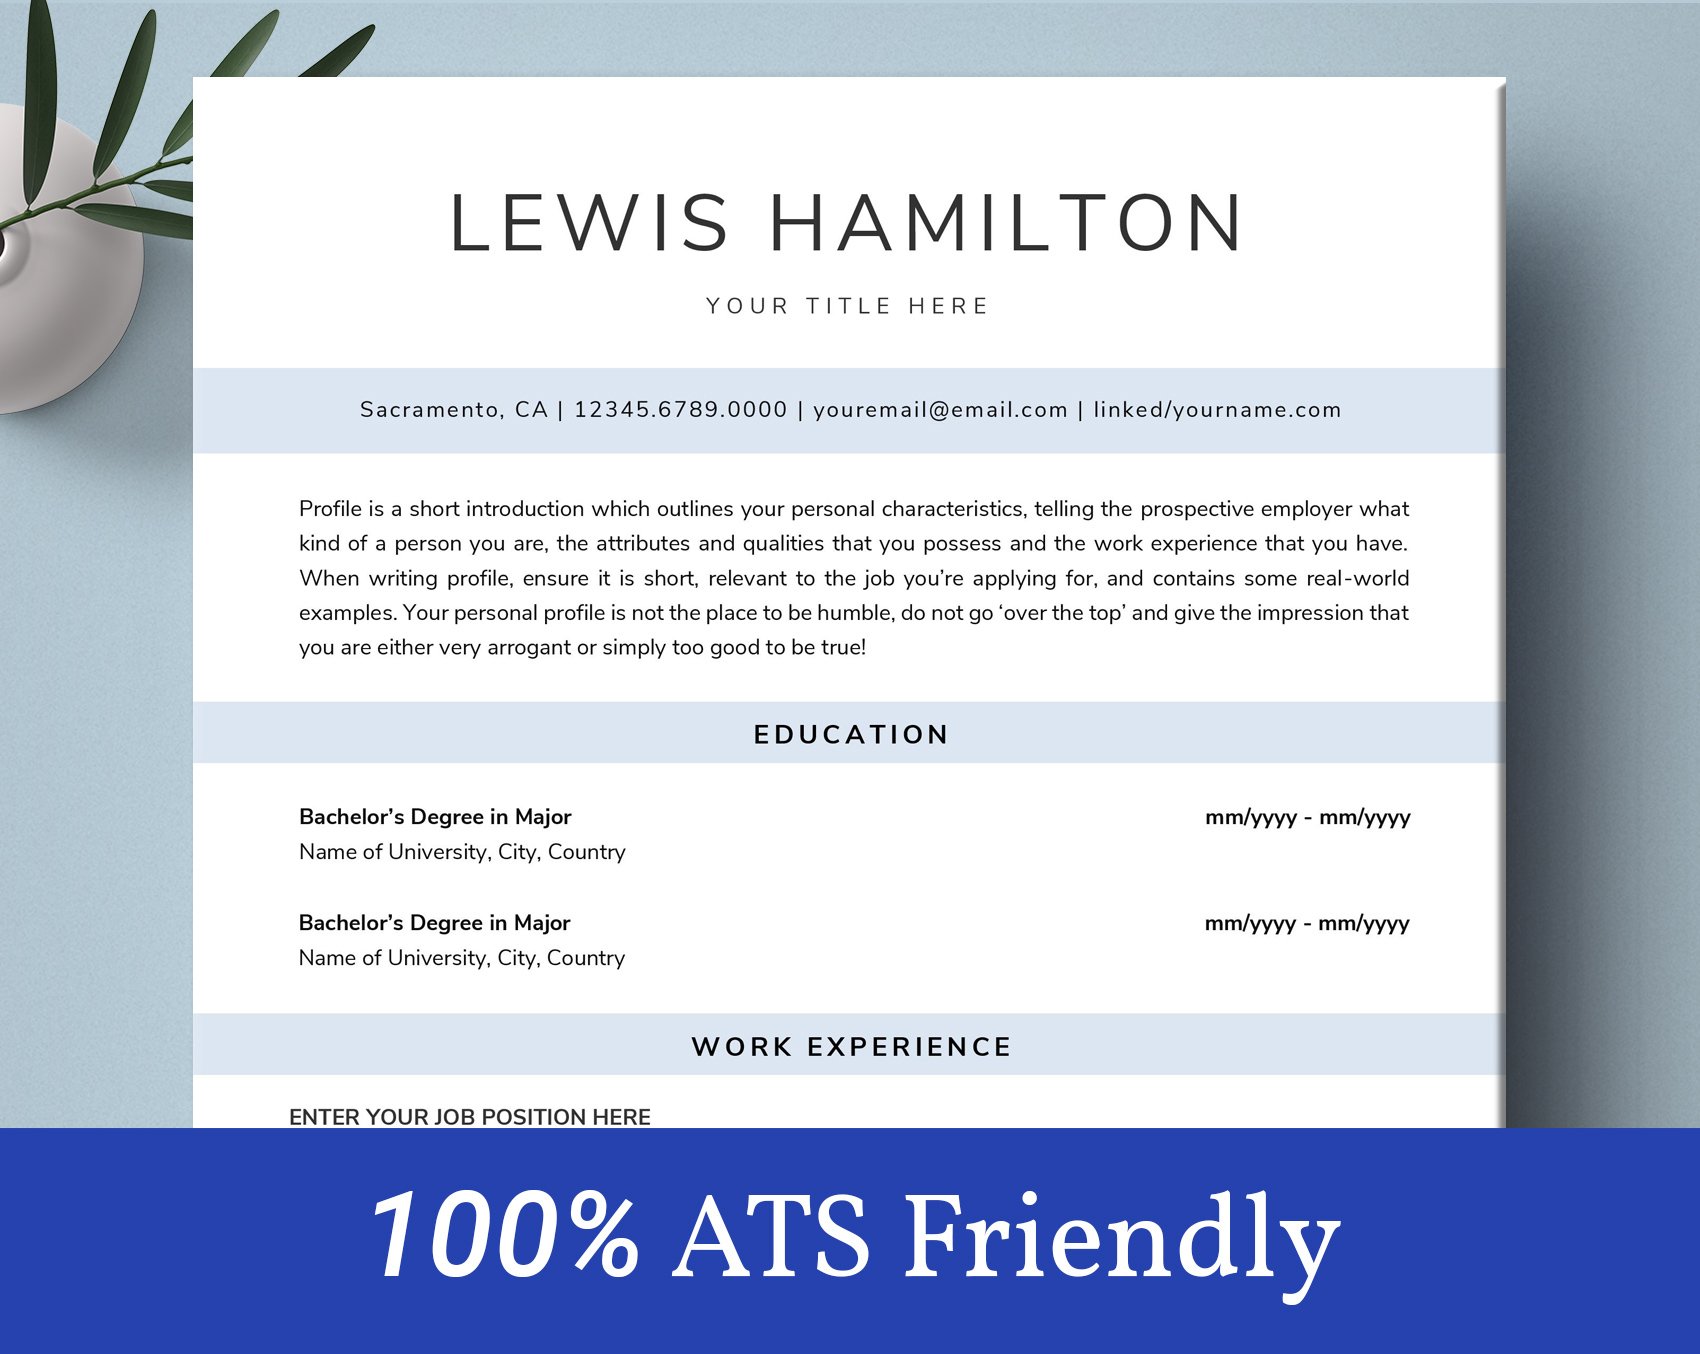 Clean Resume Template / CV cover image.